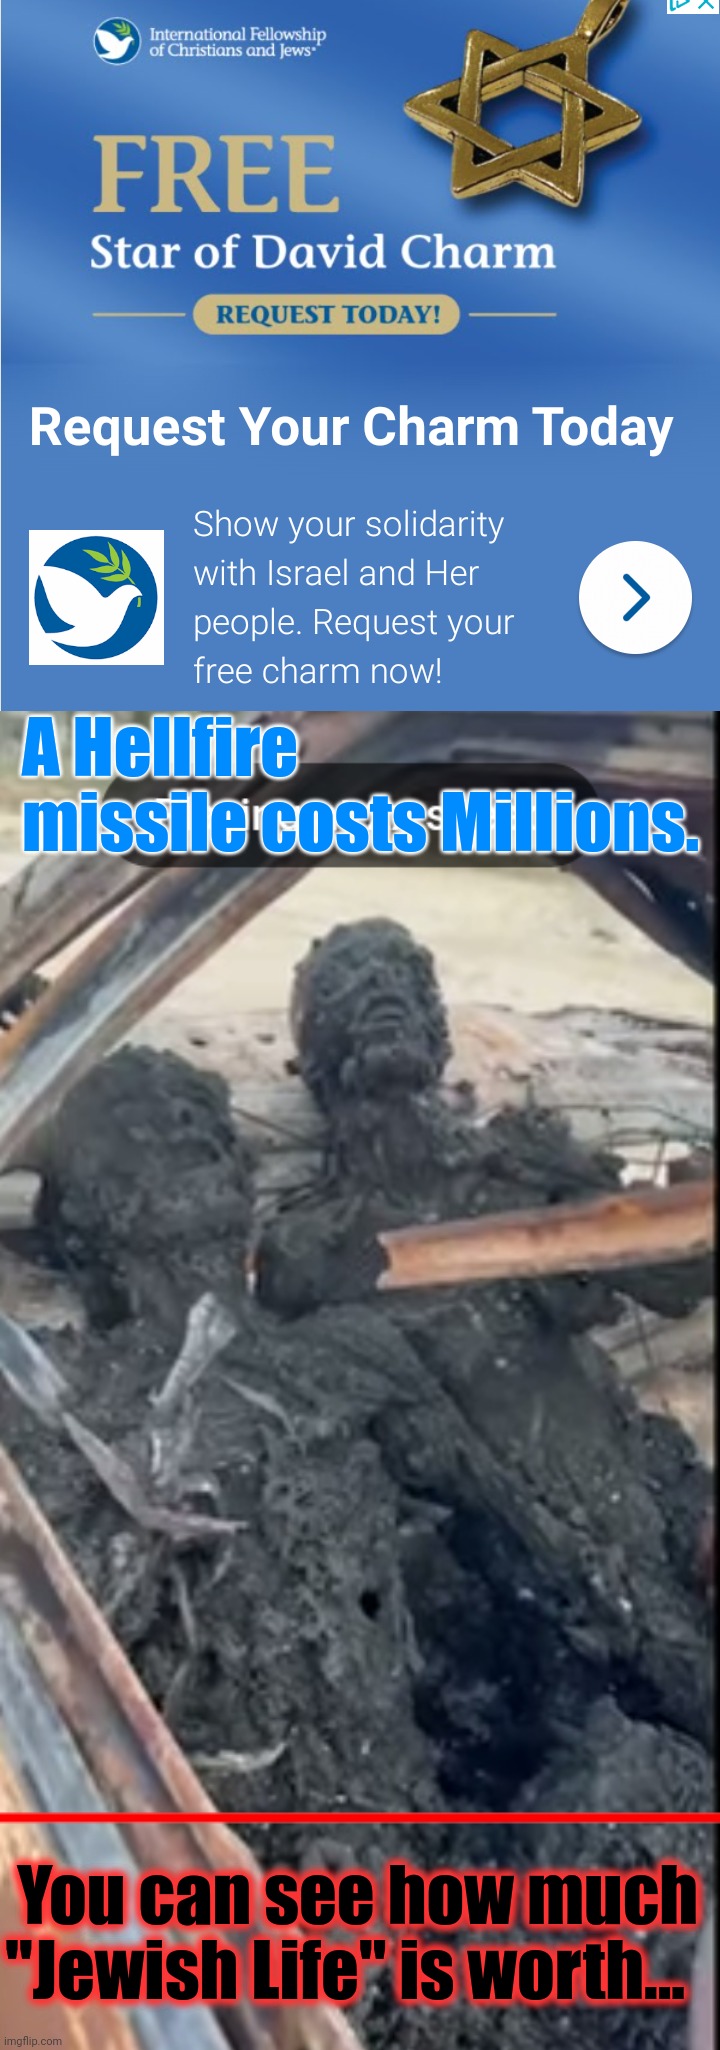 A Hellfire missile costs Millions. You can see how much "Jewish Life" is worth... | made w/ Imgflip meme maker